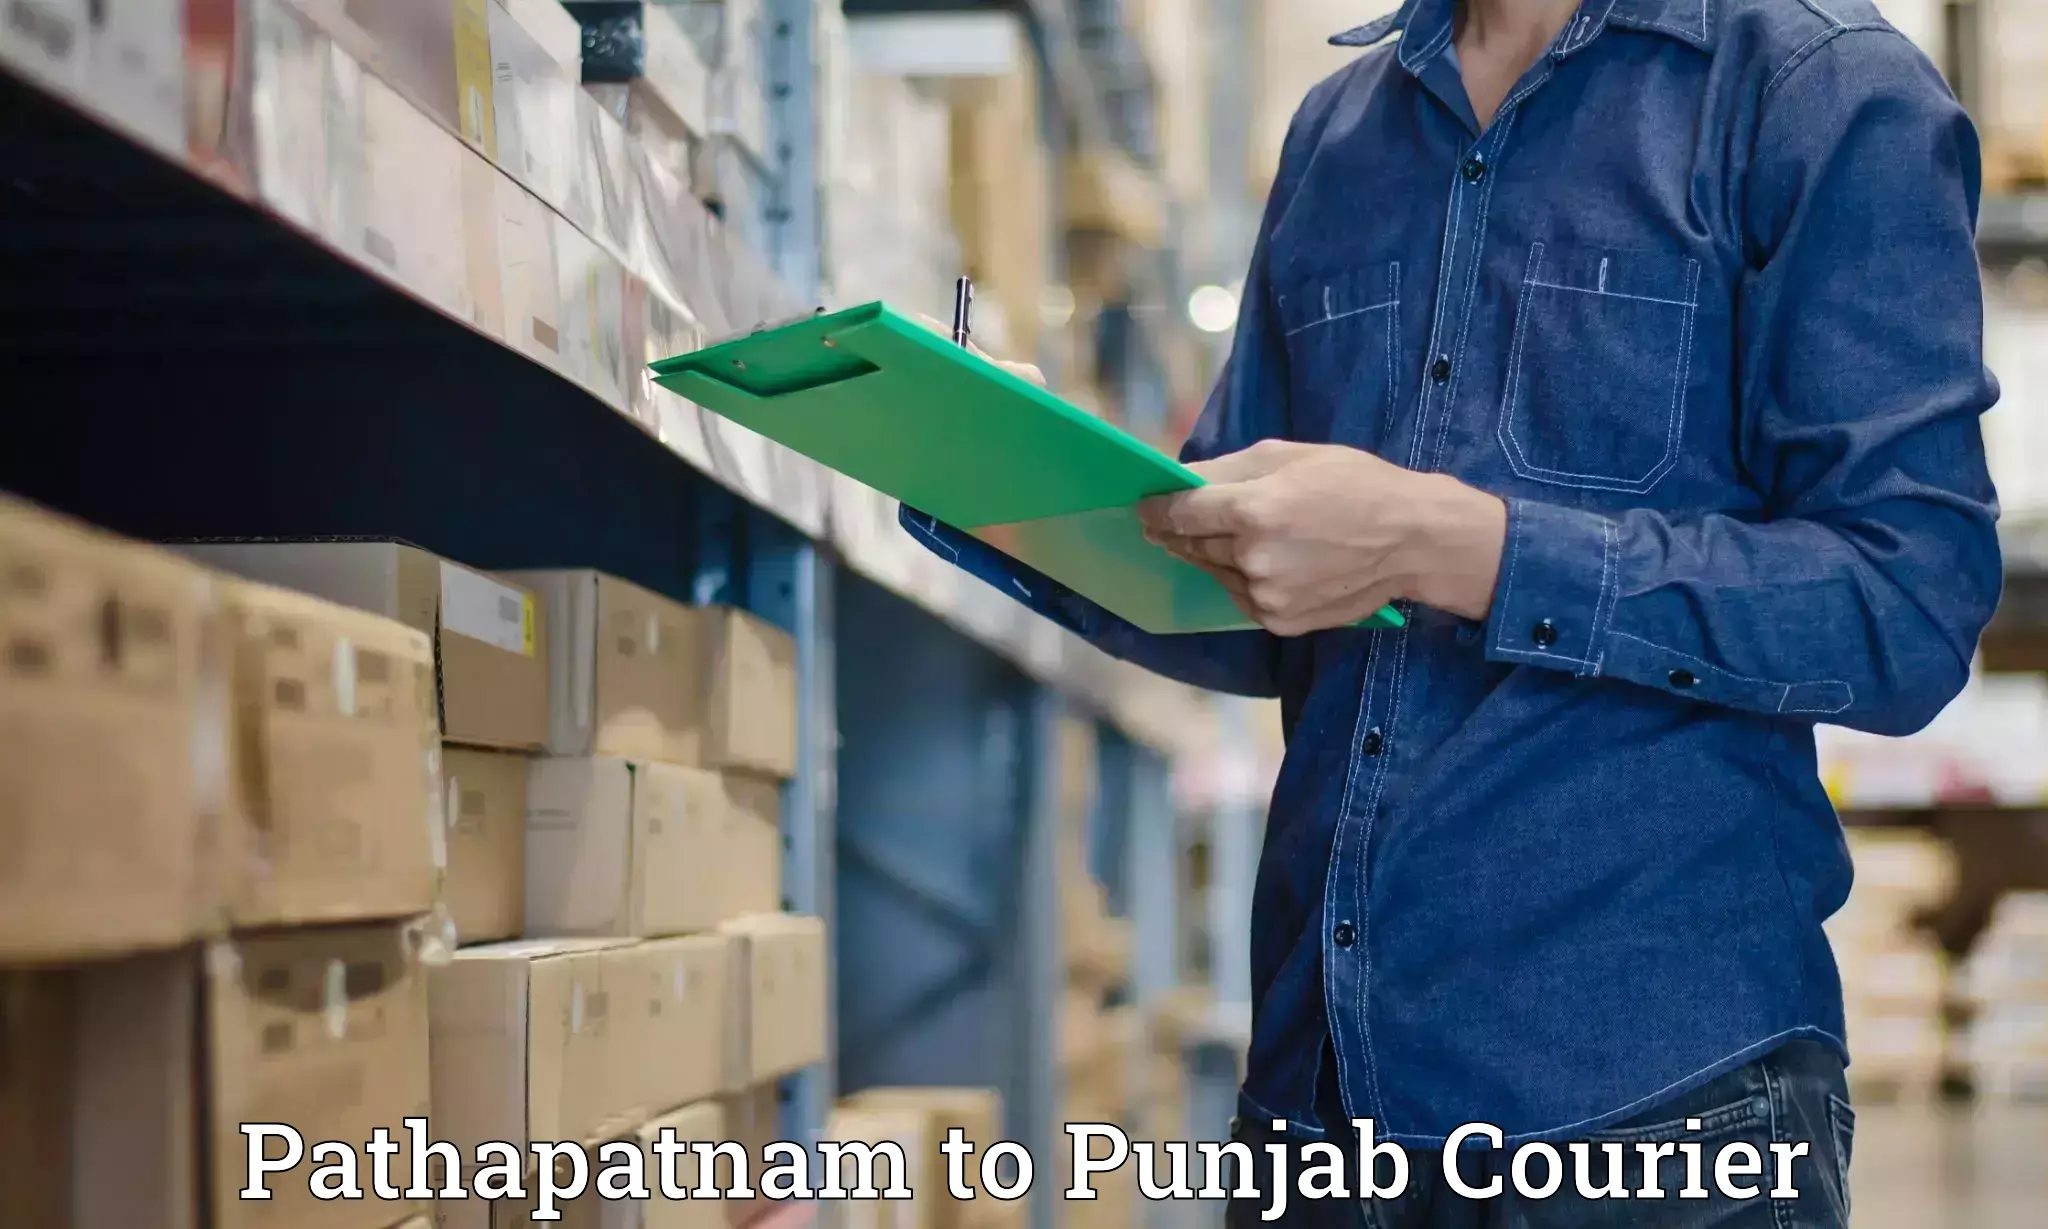 Next-day delivery options Pathapatnam to Pathankot